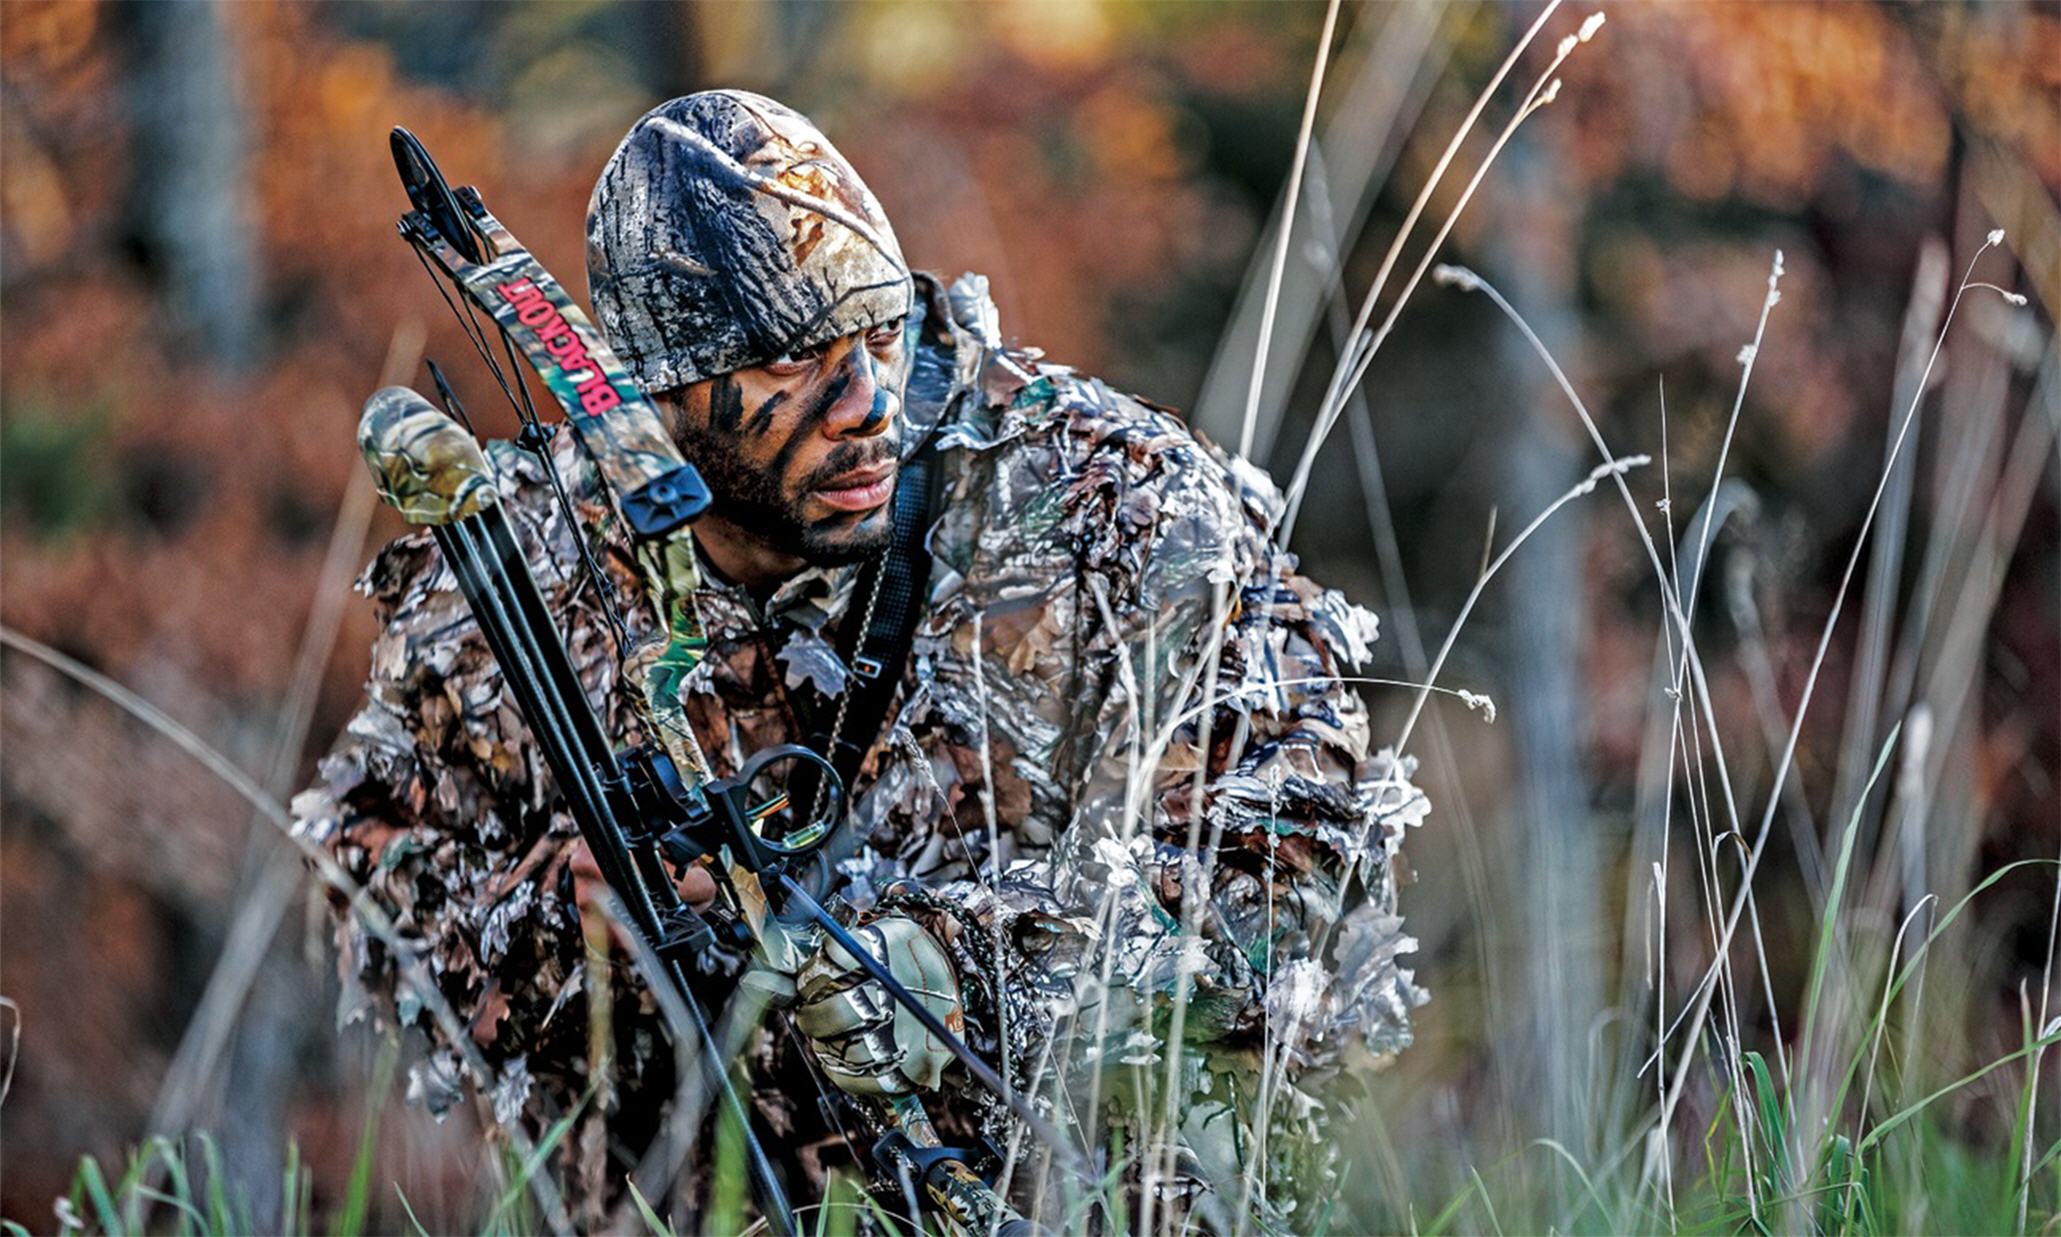 Camo Pattern Buyer's Guide